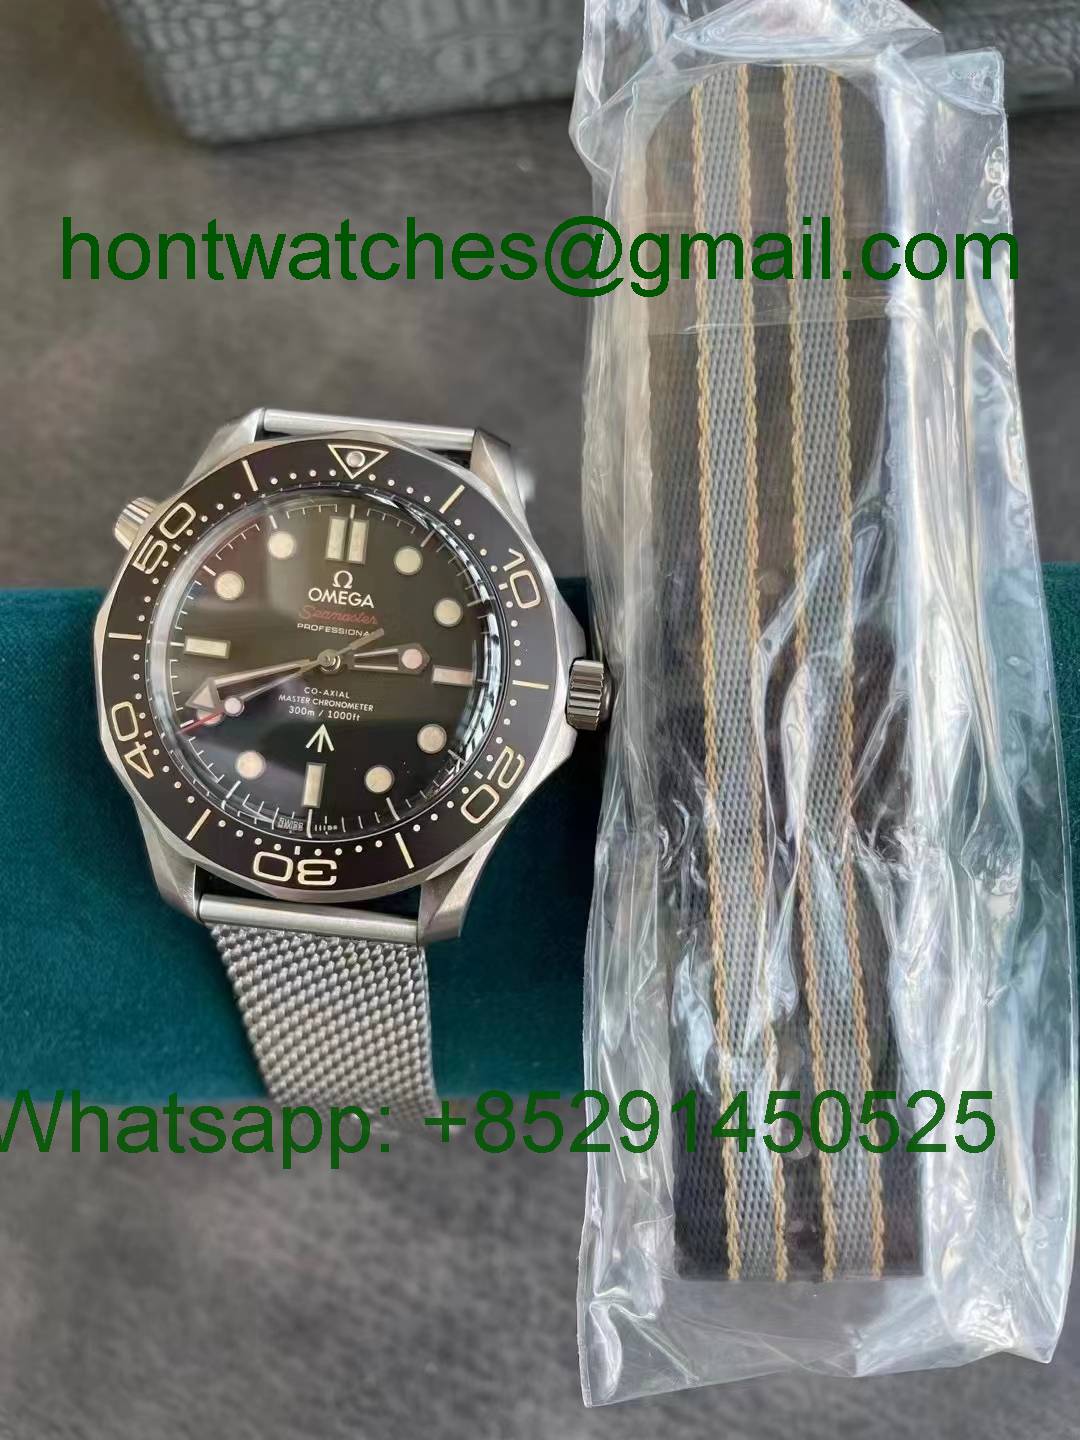 Replica OMEGA Seamster 300 No Time to Die Titanium V4 VSF 1:1 Best Hontwatch Replica Watch Wholesale